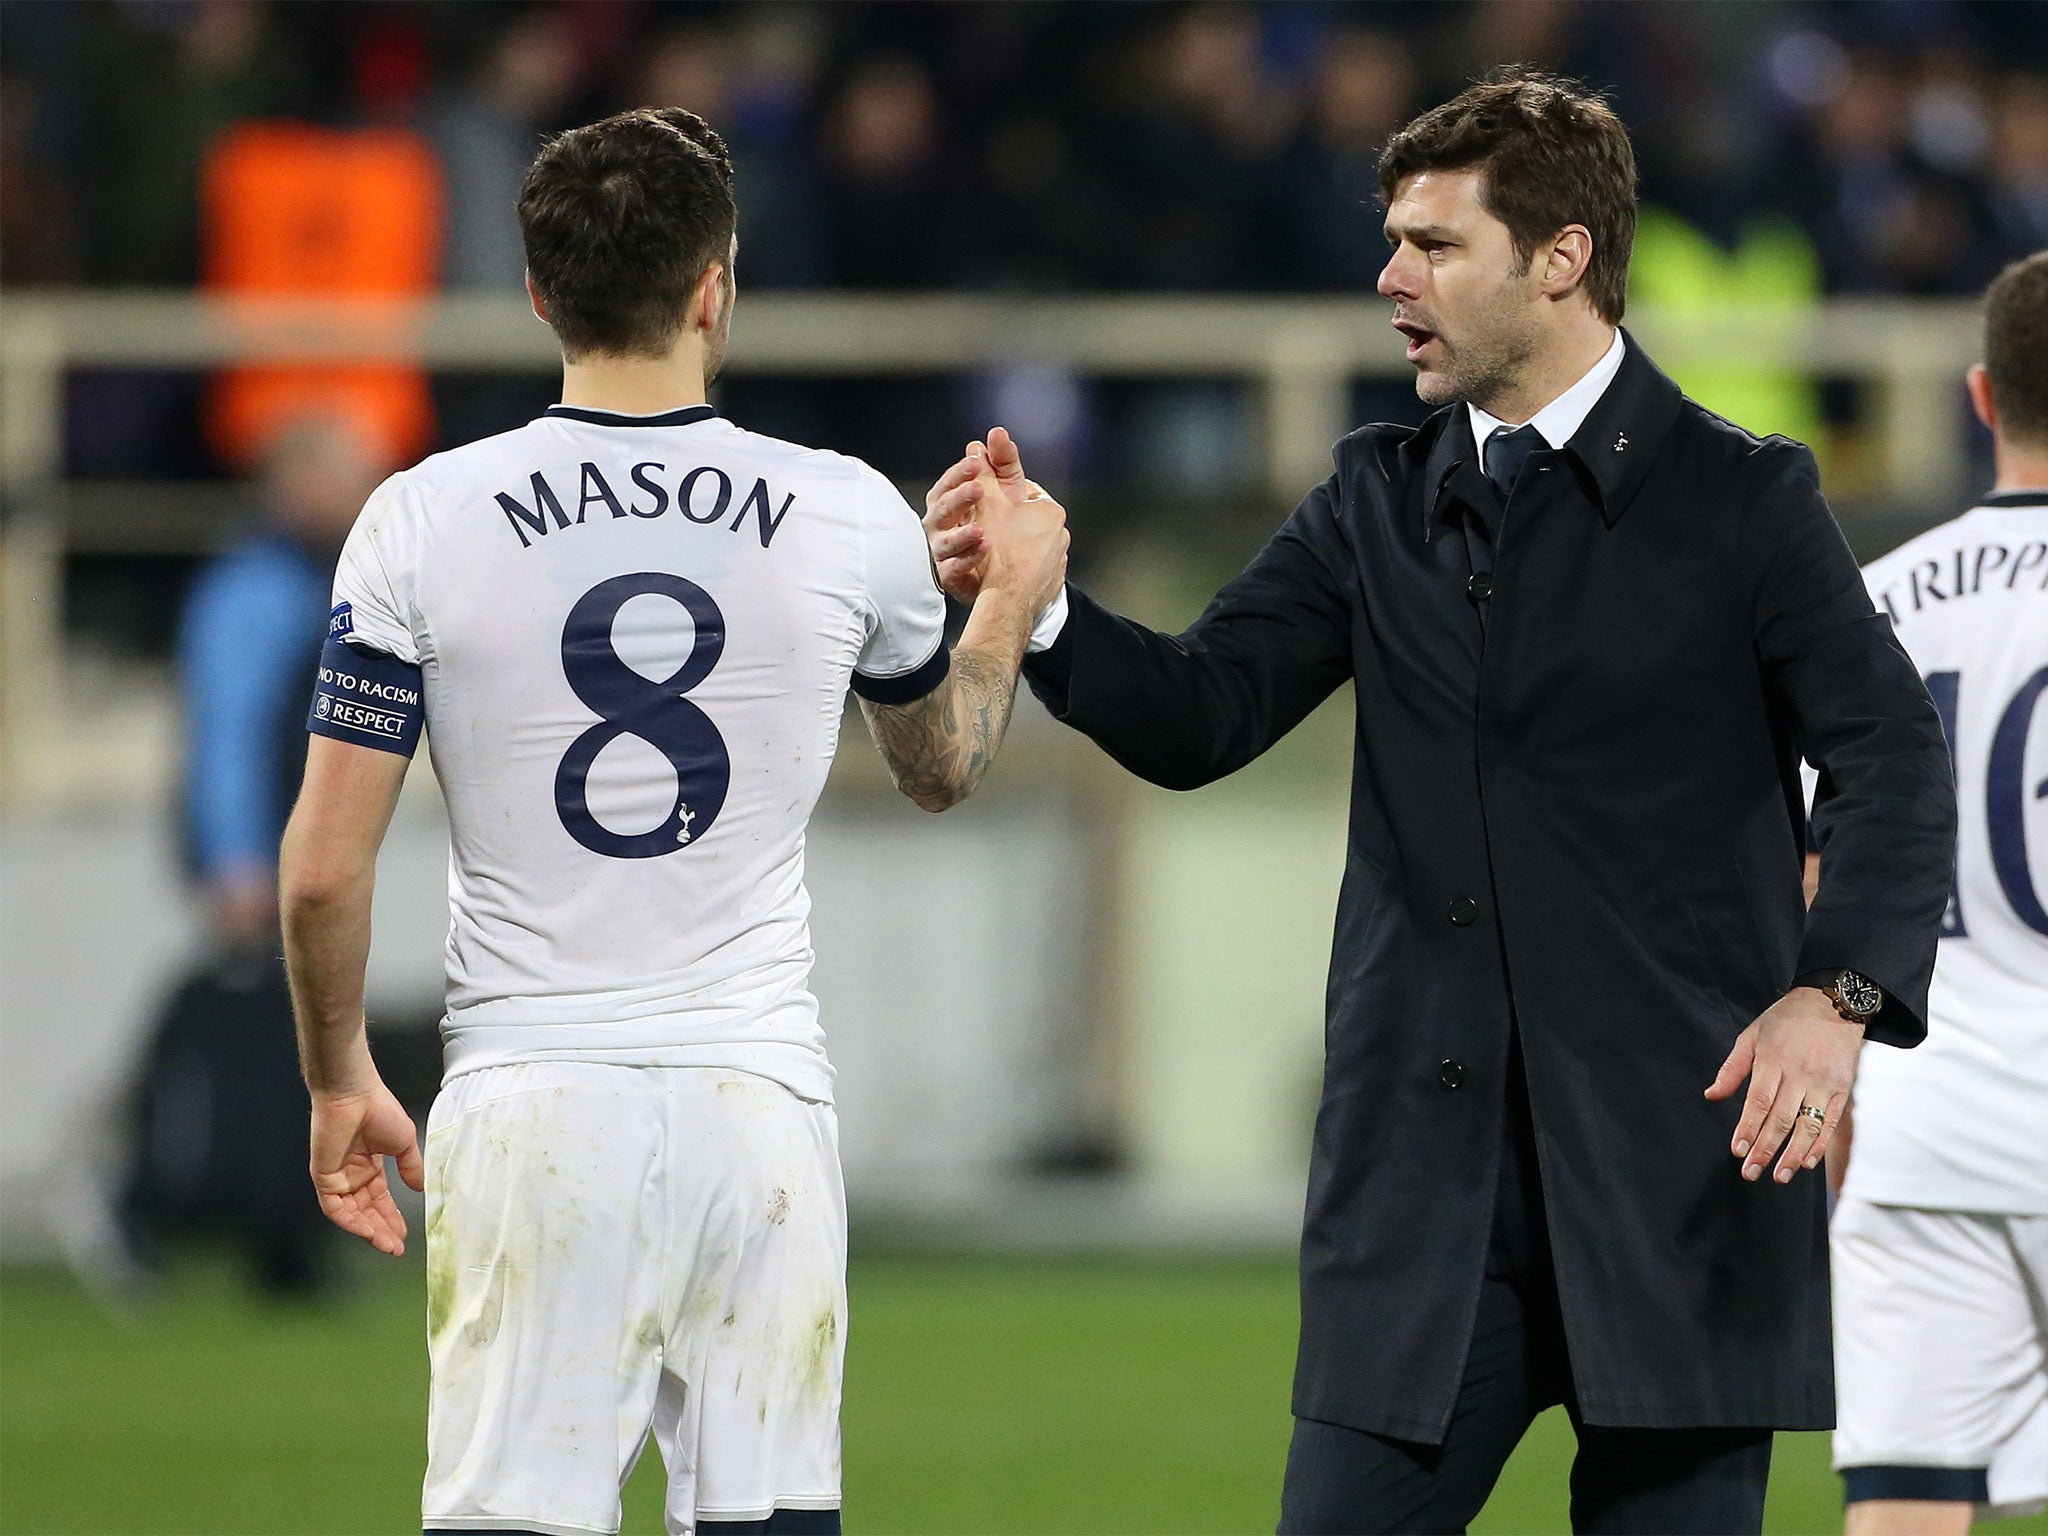 Tottenham and Mauricio Pochettino owe a debt to Ryan Mason that they will never forget as the midfielder retires